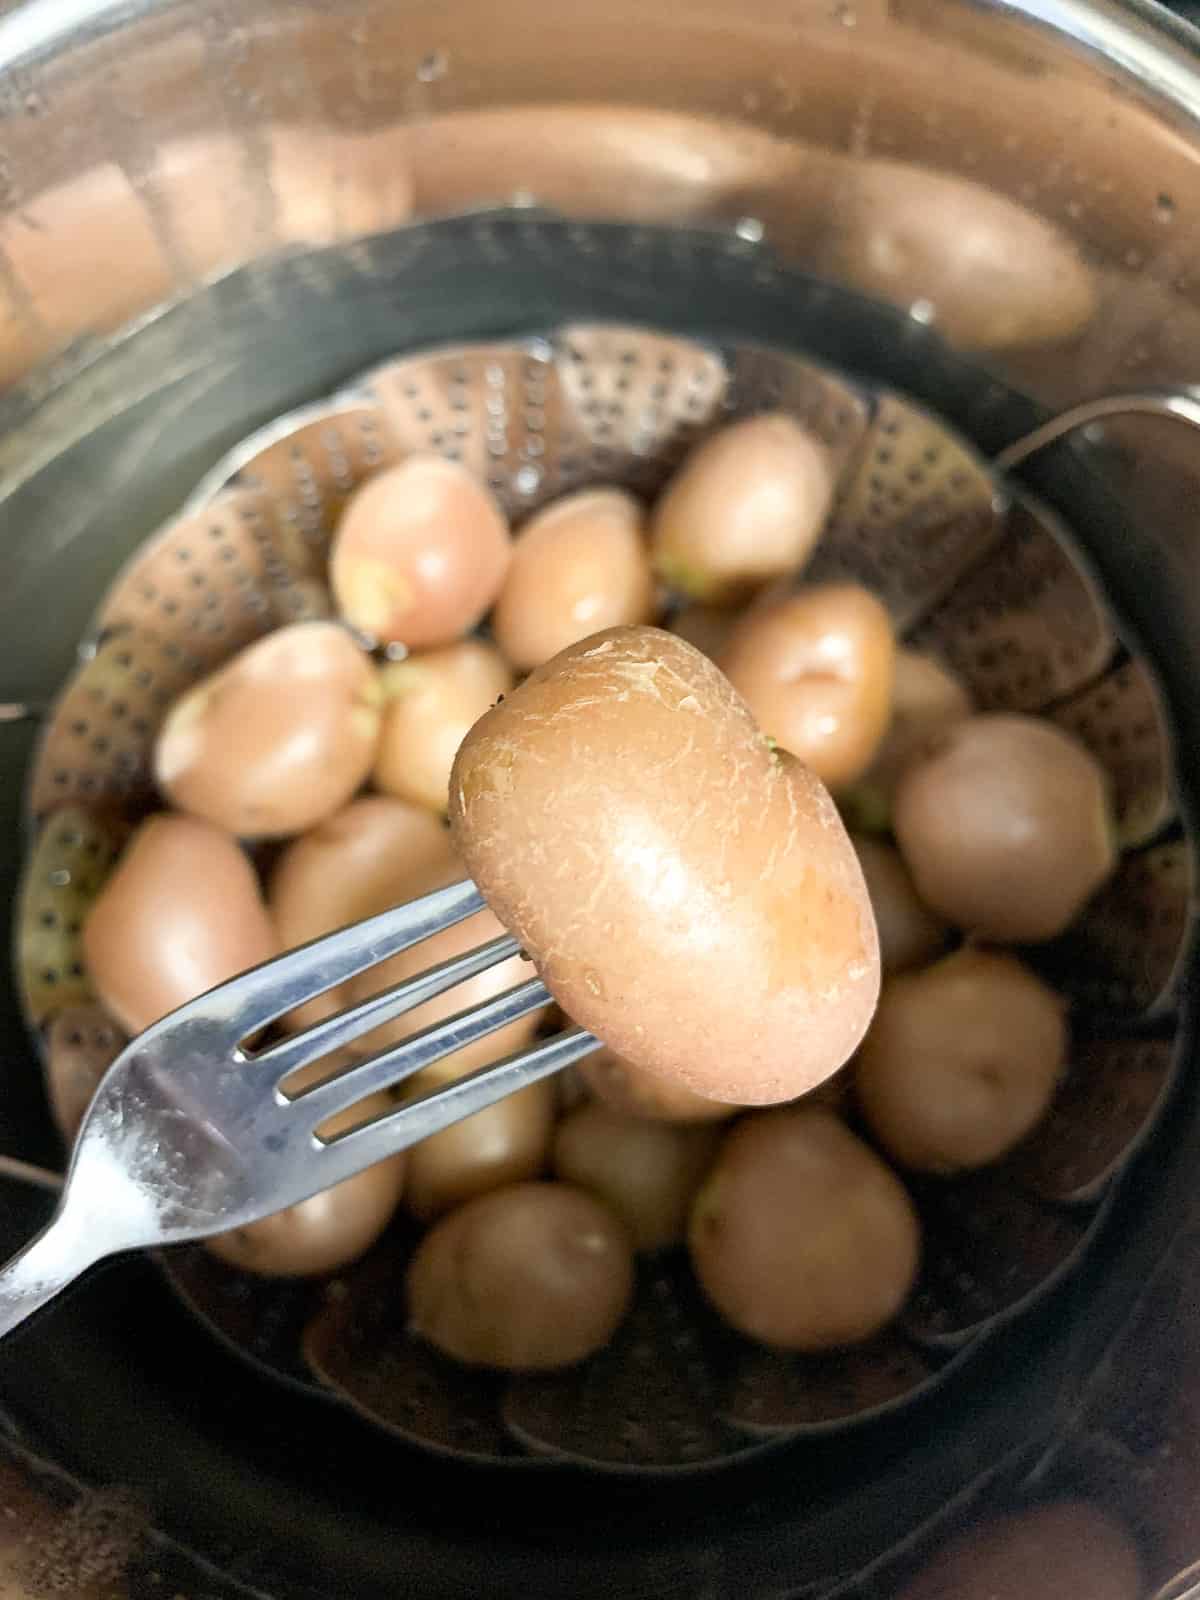 Steaming potatoes in an Instant Pot